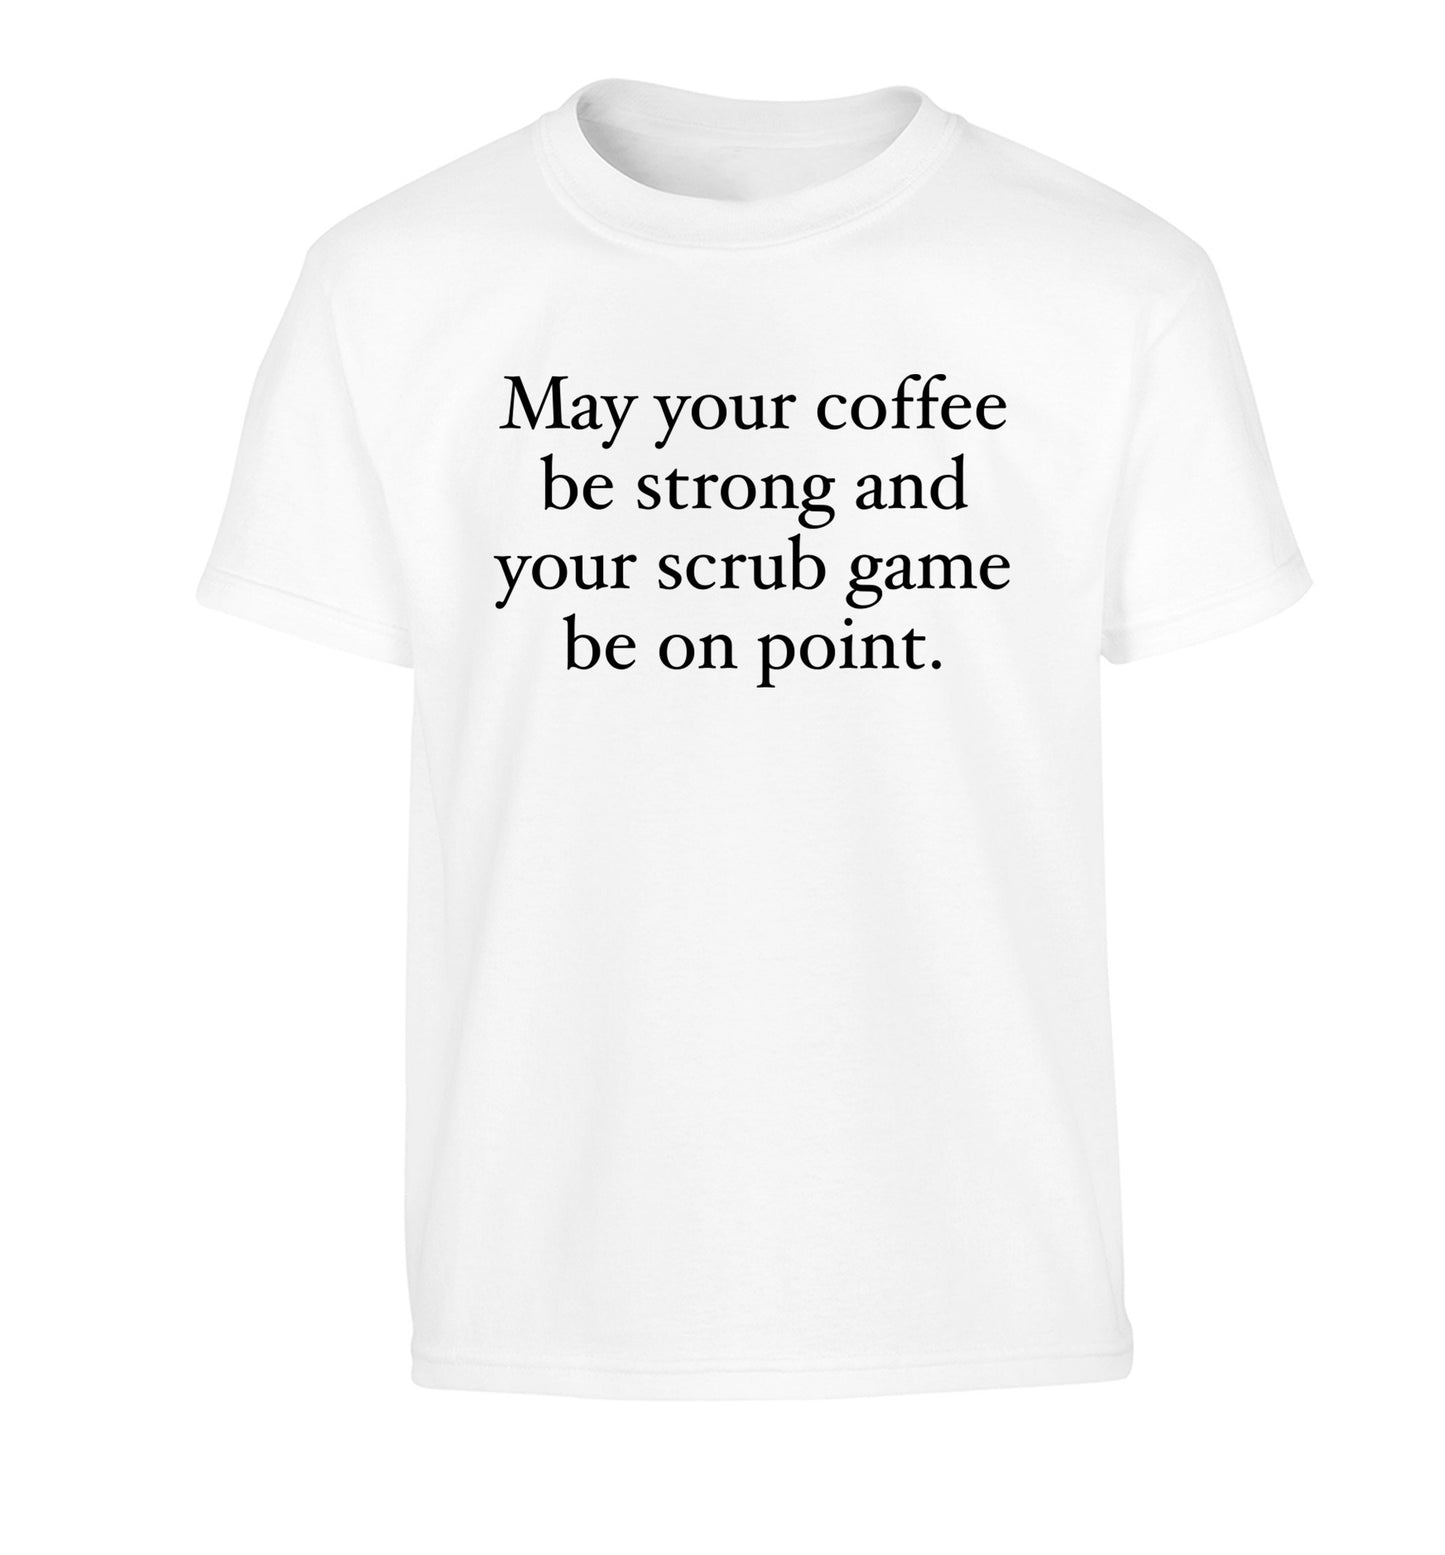 May your caffeine be strong and your scrub game be on point Children's white Tshirt 12-14 Years